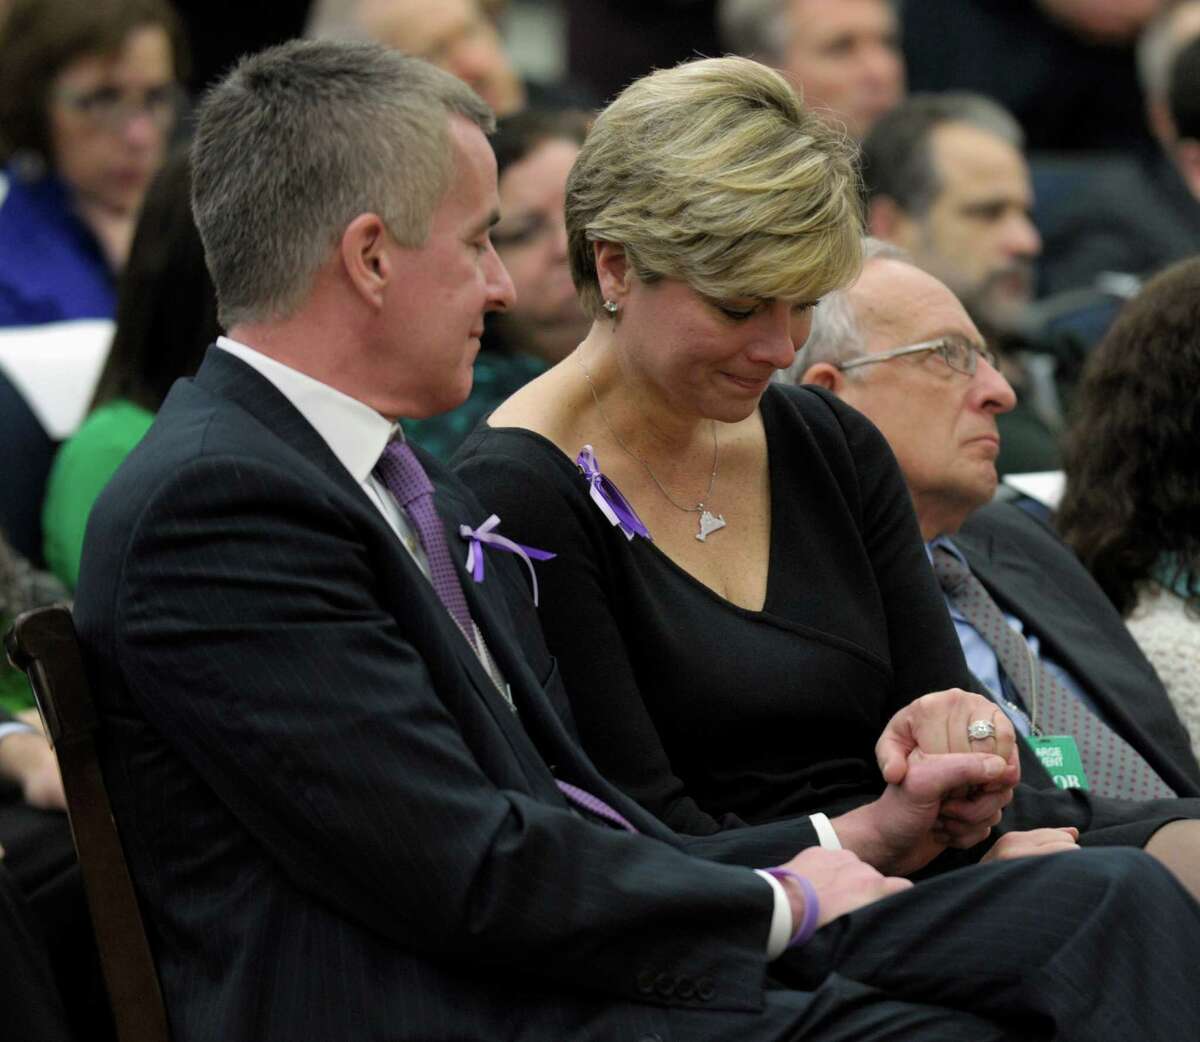 Lynn and Chris McDonnell, parents of Grace McDonnell who was killed in the Newtown, Conn. school shooting, listen as President Barack Obama talks about their daughter during a news conference on proposals to reduce gun violence, Wednesday, Jan. 16, 2013, in the South Court Auditorium at the White House in Washington.